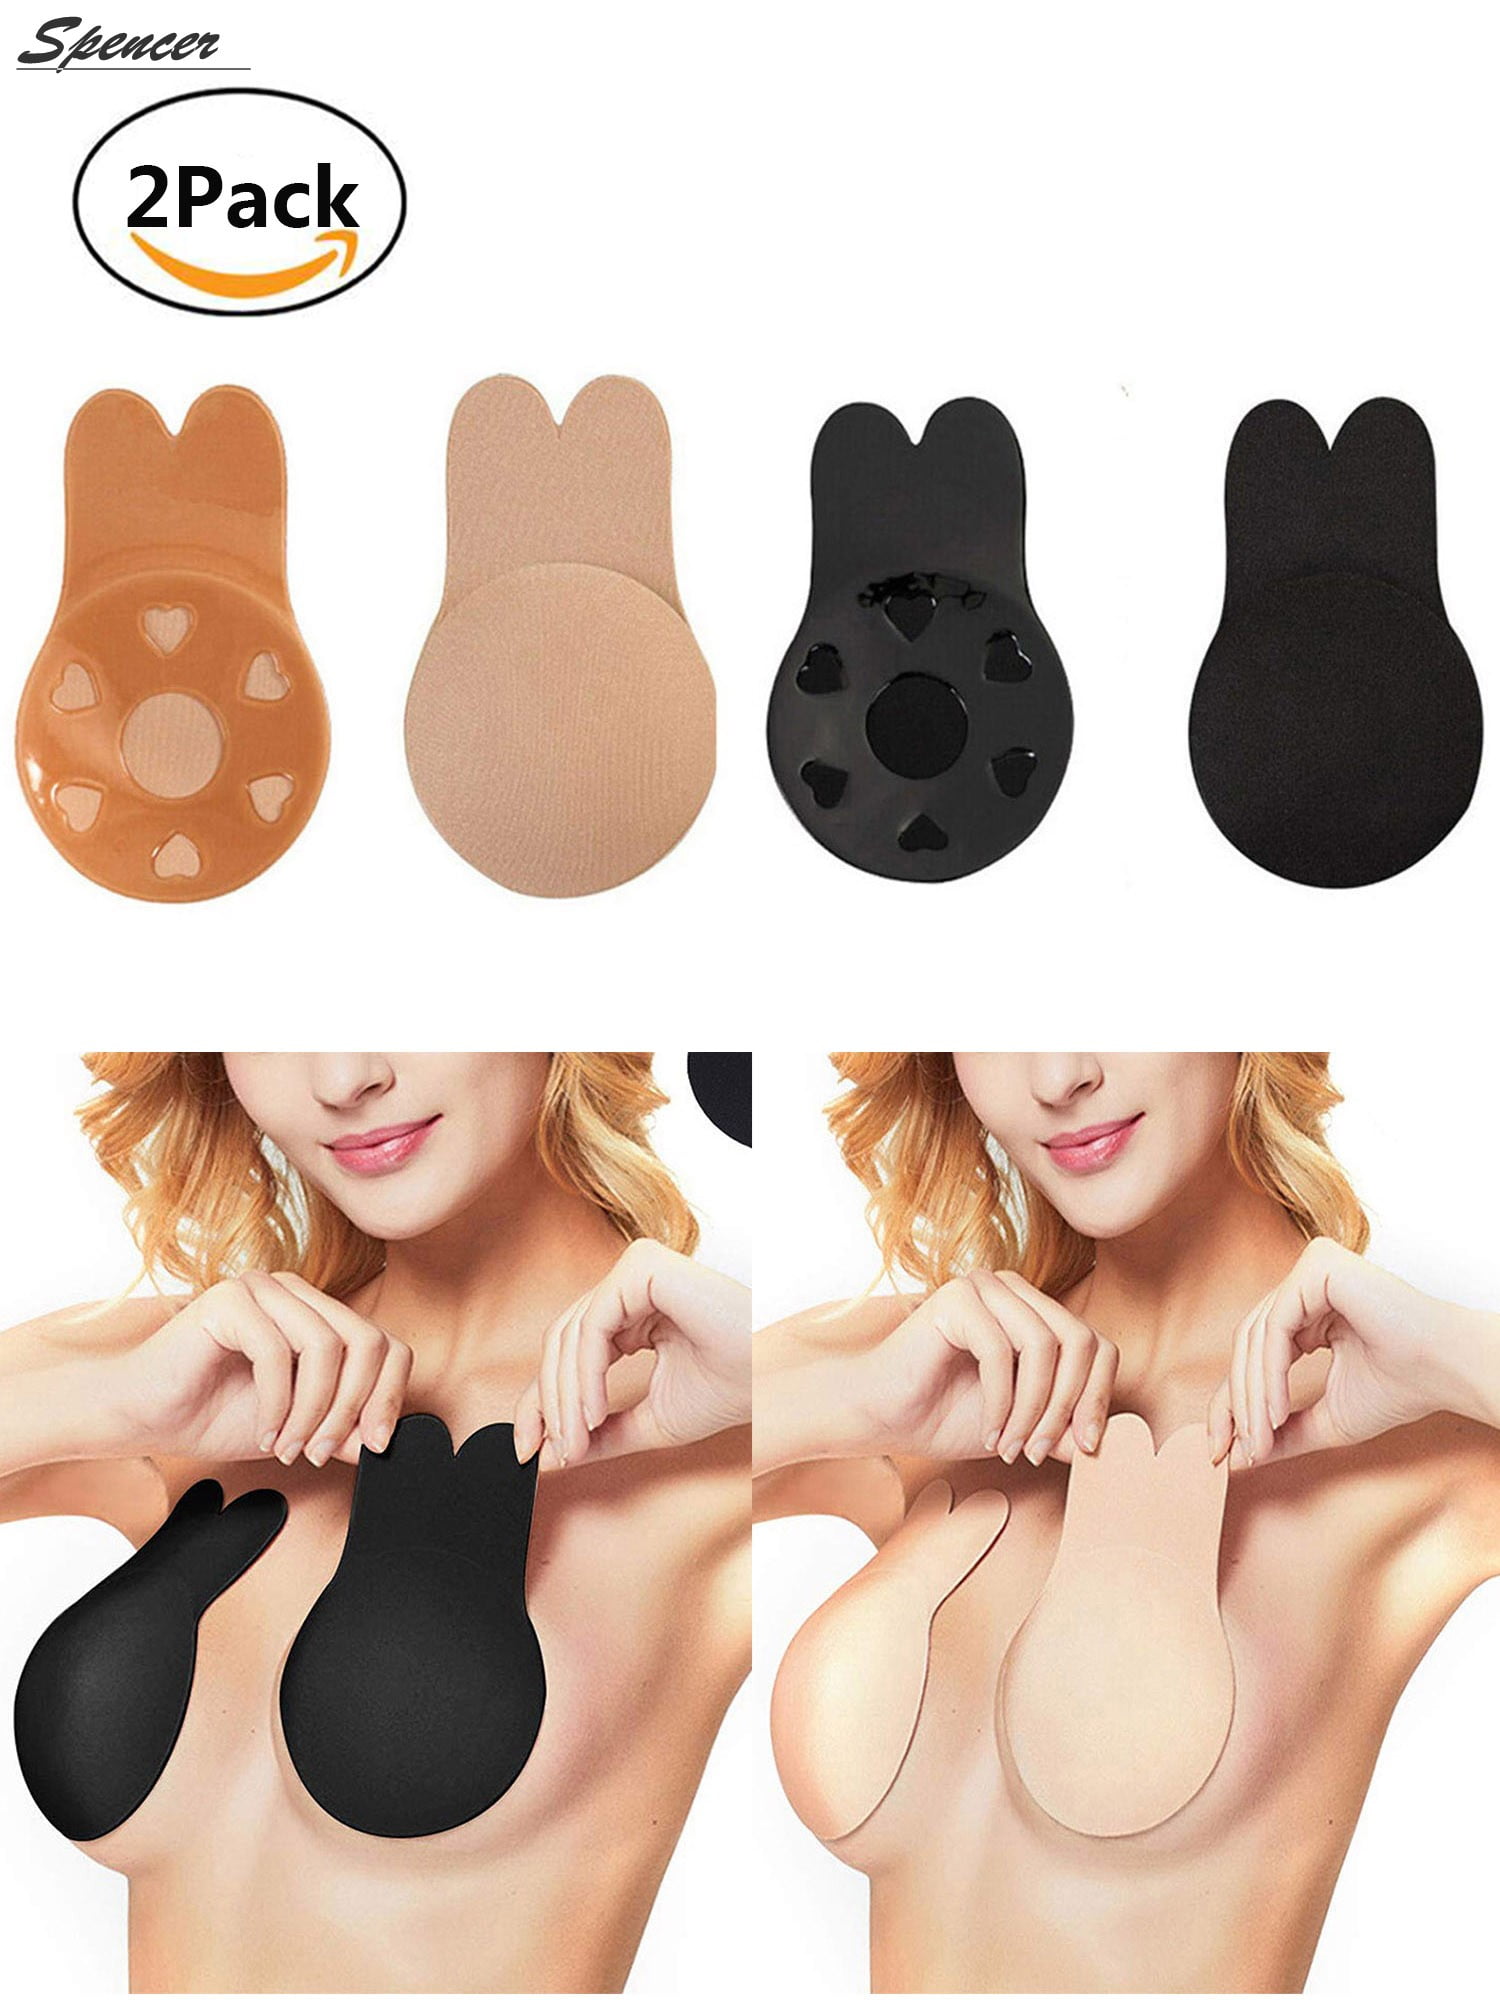 Spencer 2Pairs Rabbit Ear Women's Strapless Push Up Backless Bra Self  Adhesive Invisible Bra Silicone Sticky Nipple Covers Breathable Lifting